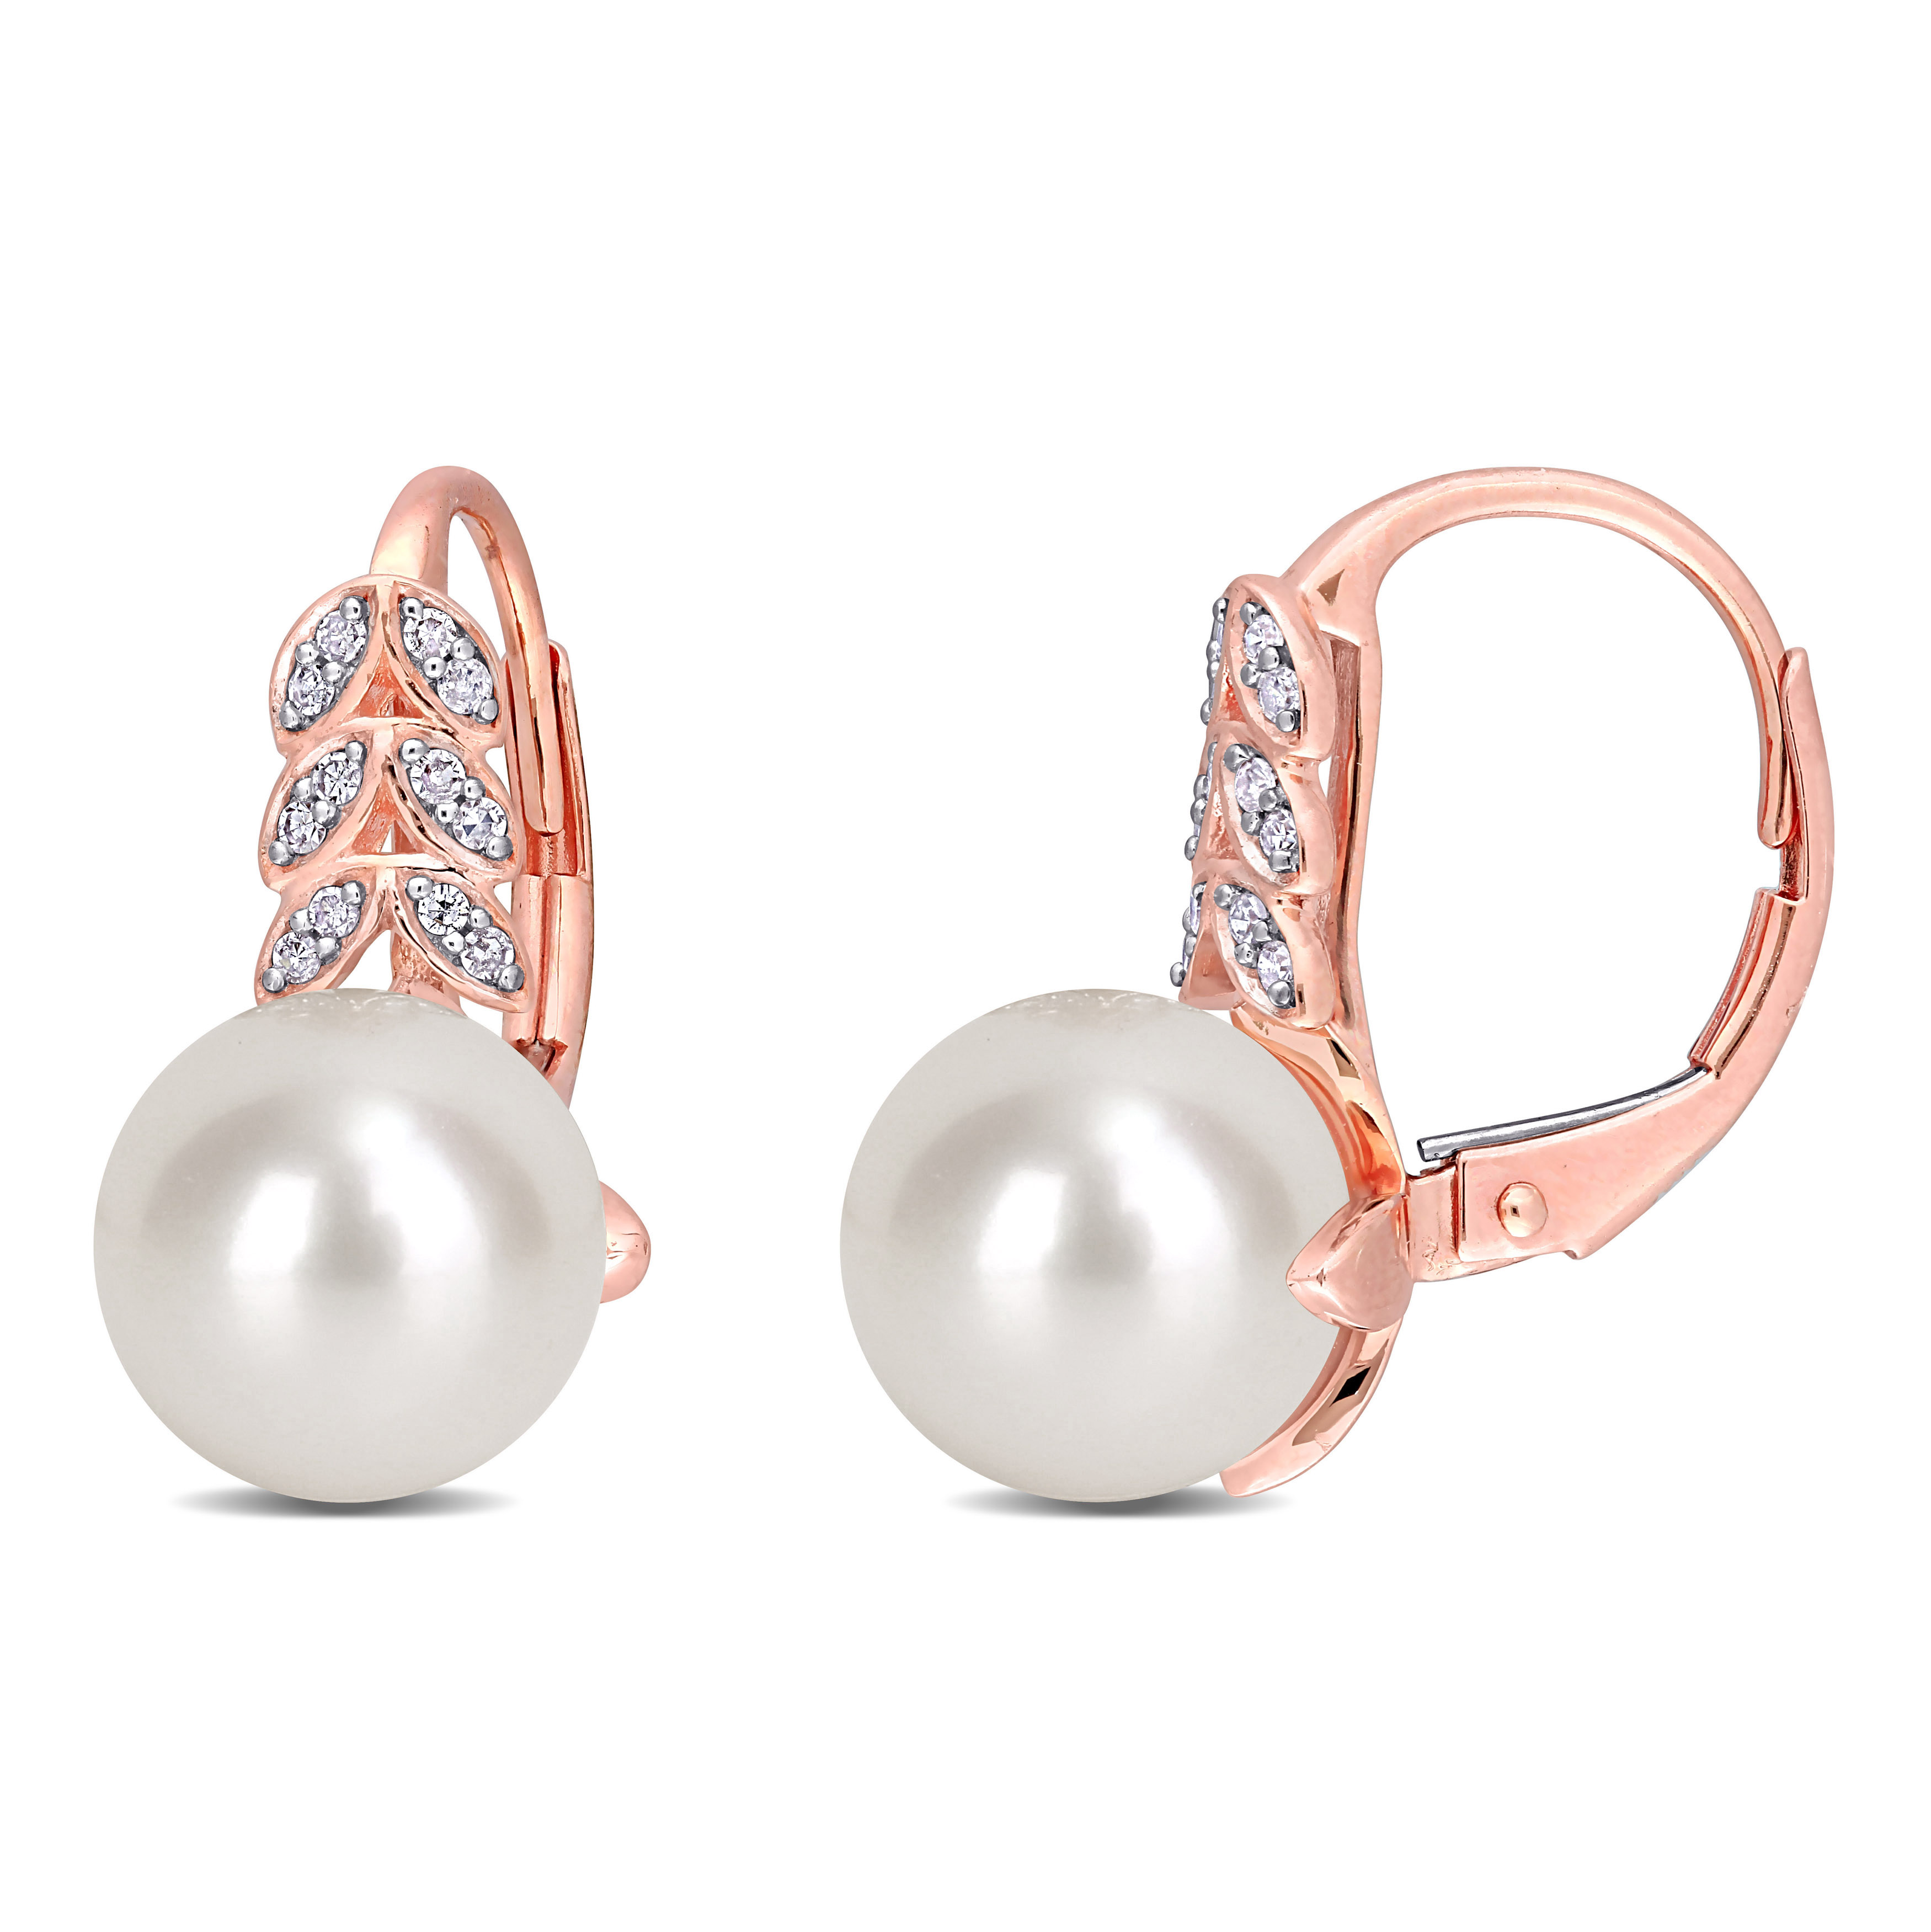 9-9.5 MM Cultured White Freshwater Pearl and 1/10 CT TW Diamond Leverback Earrings in 10k Rose Gold